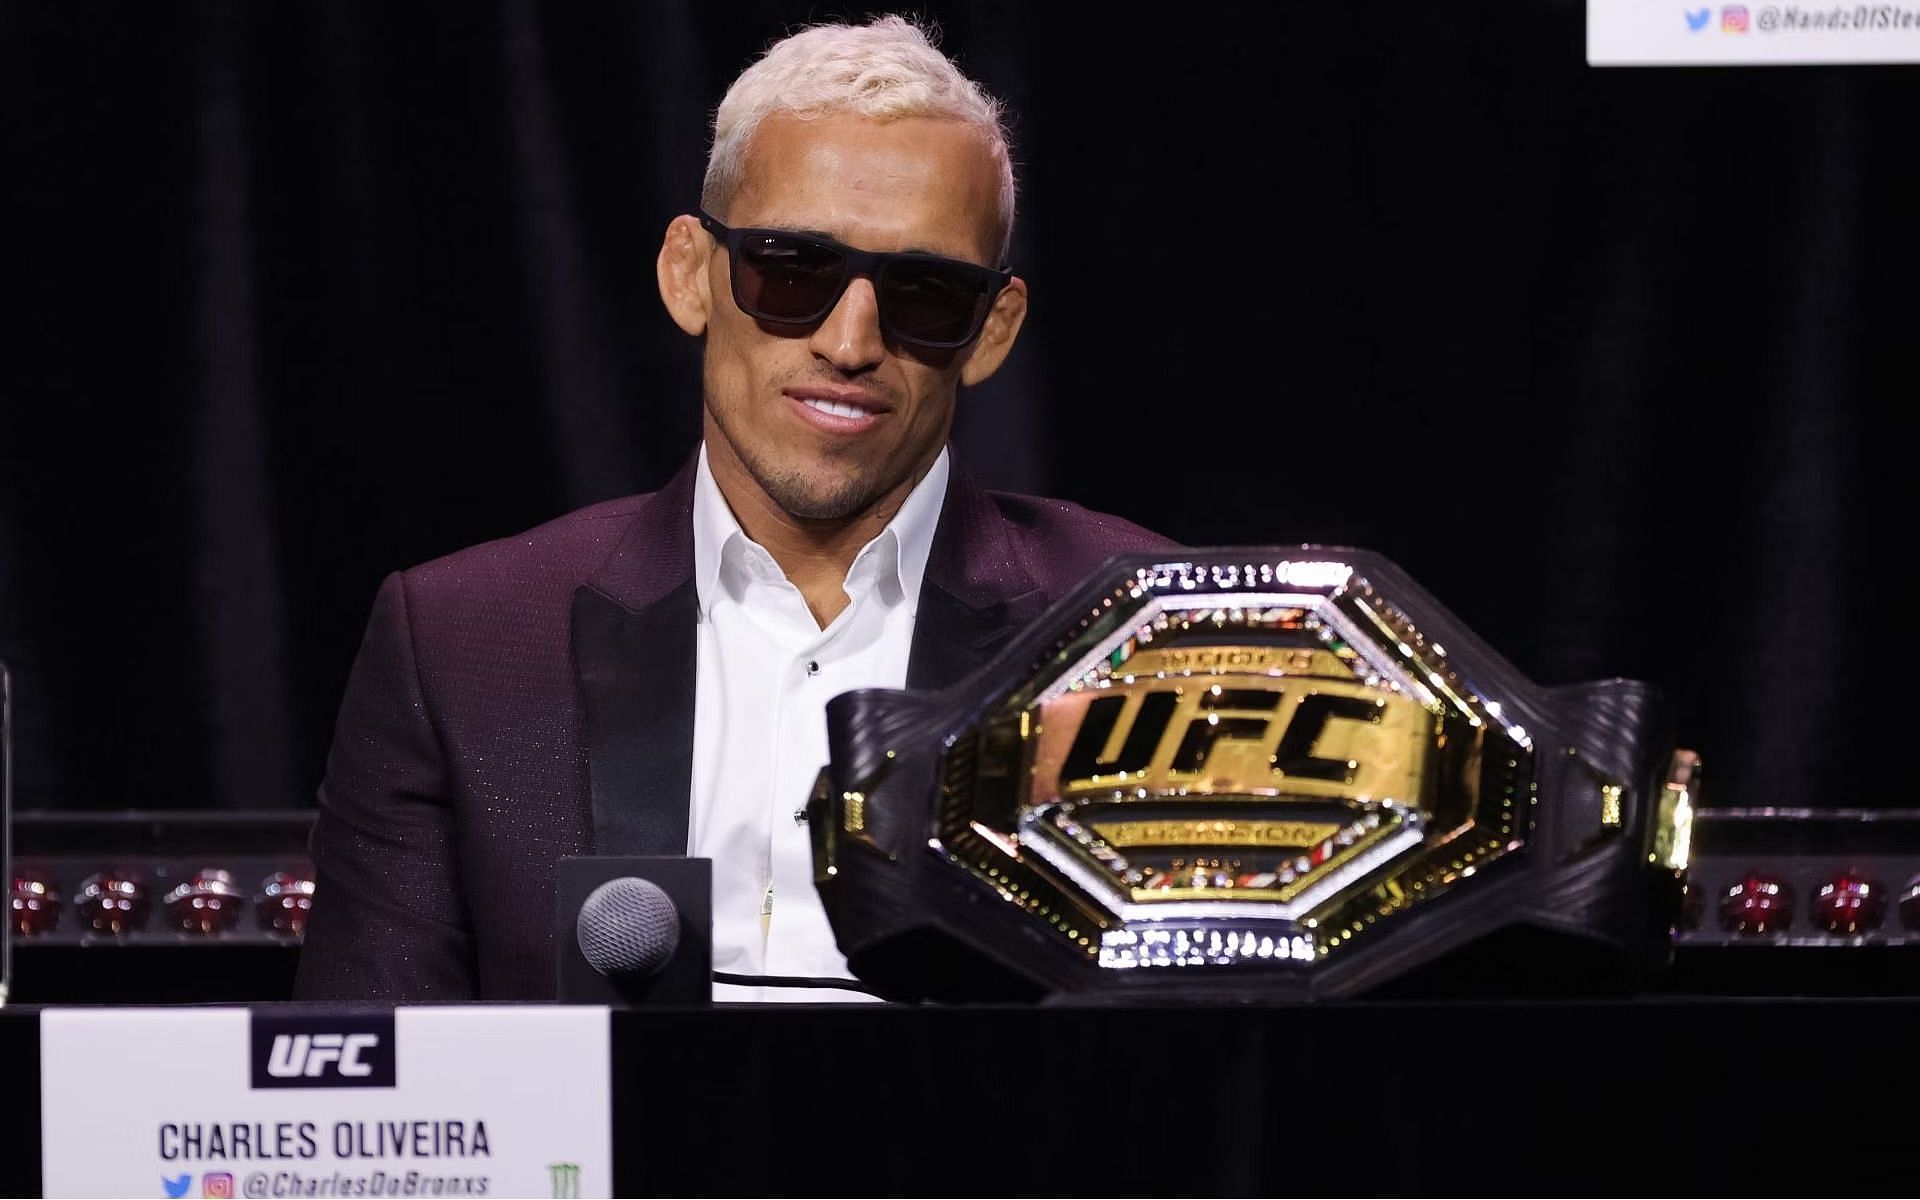 Former UFC lightweight champ Charles Oliveira is back in action this weekend [Image Credit: Getty]